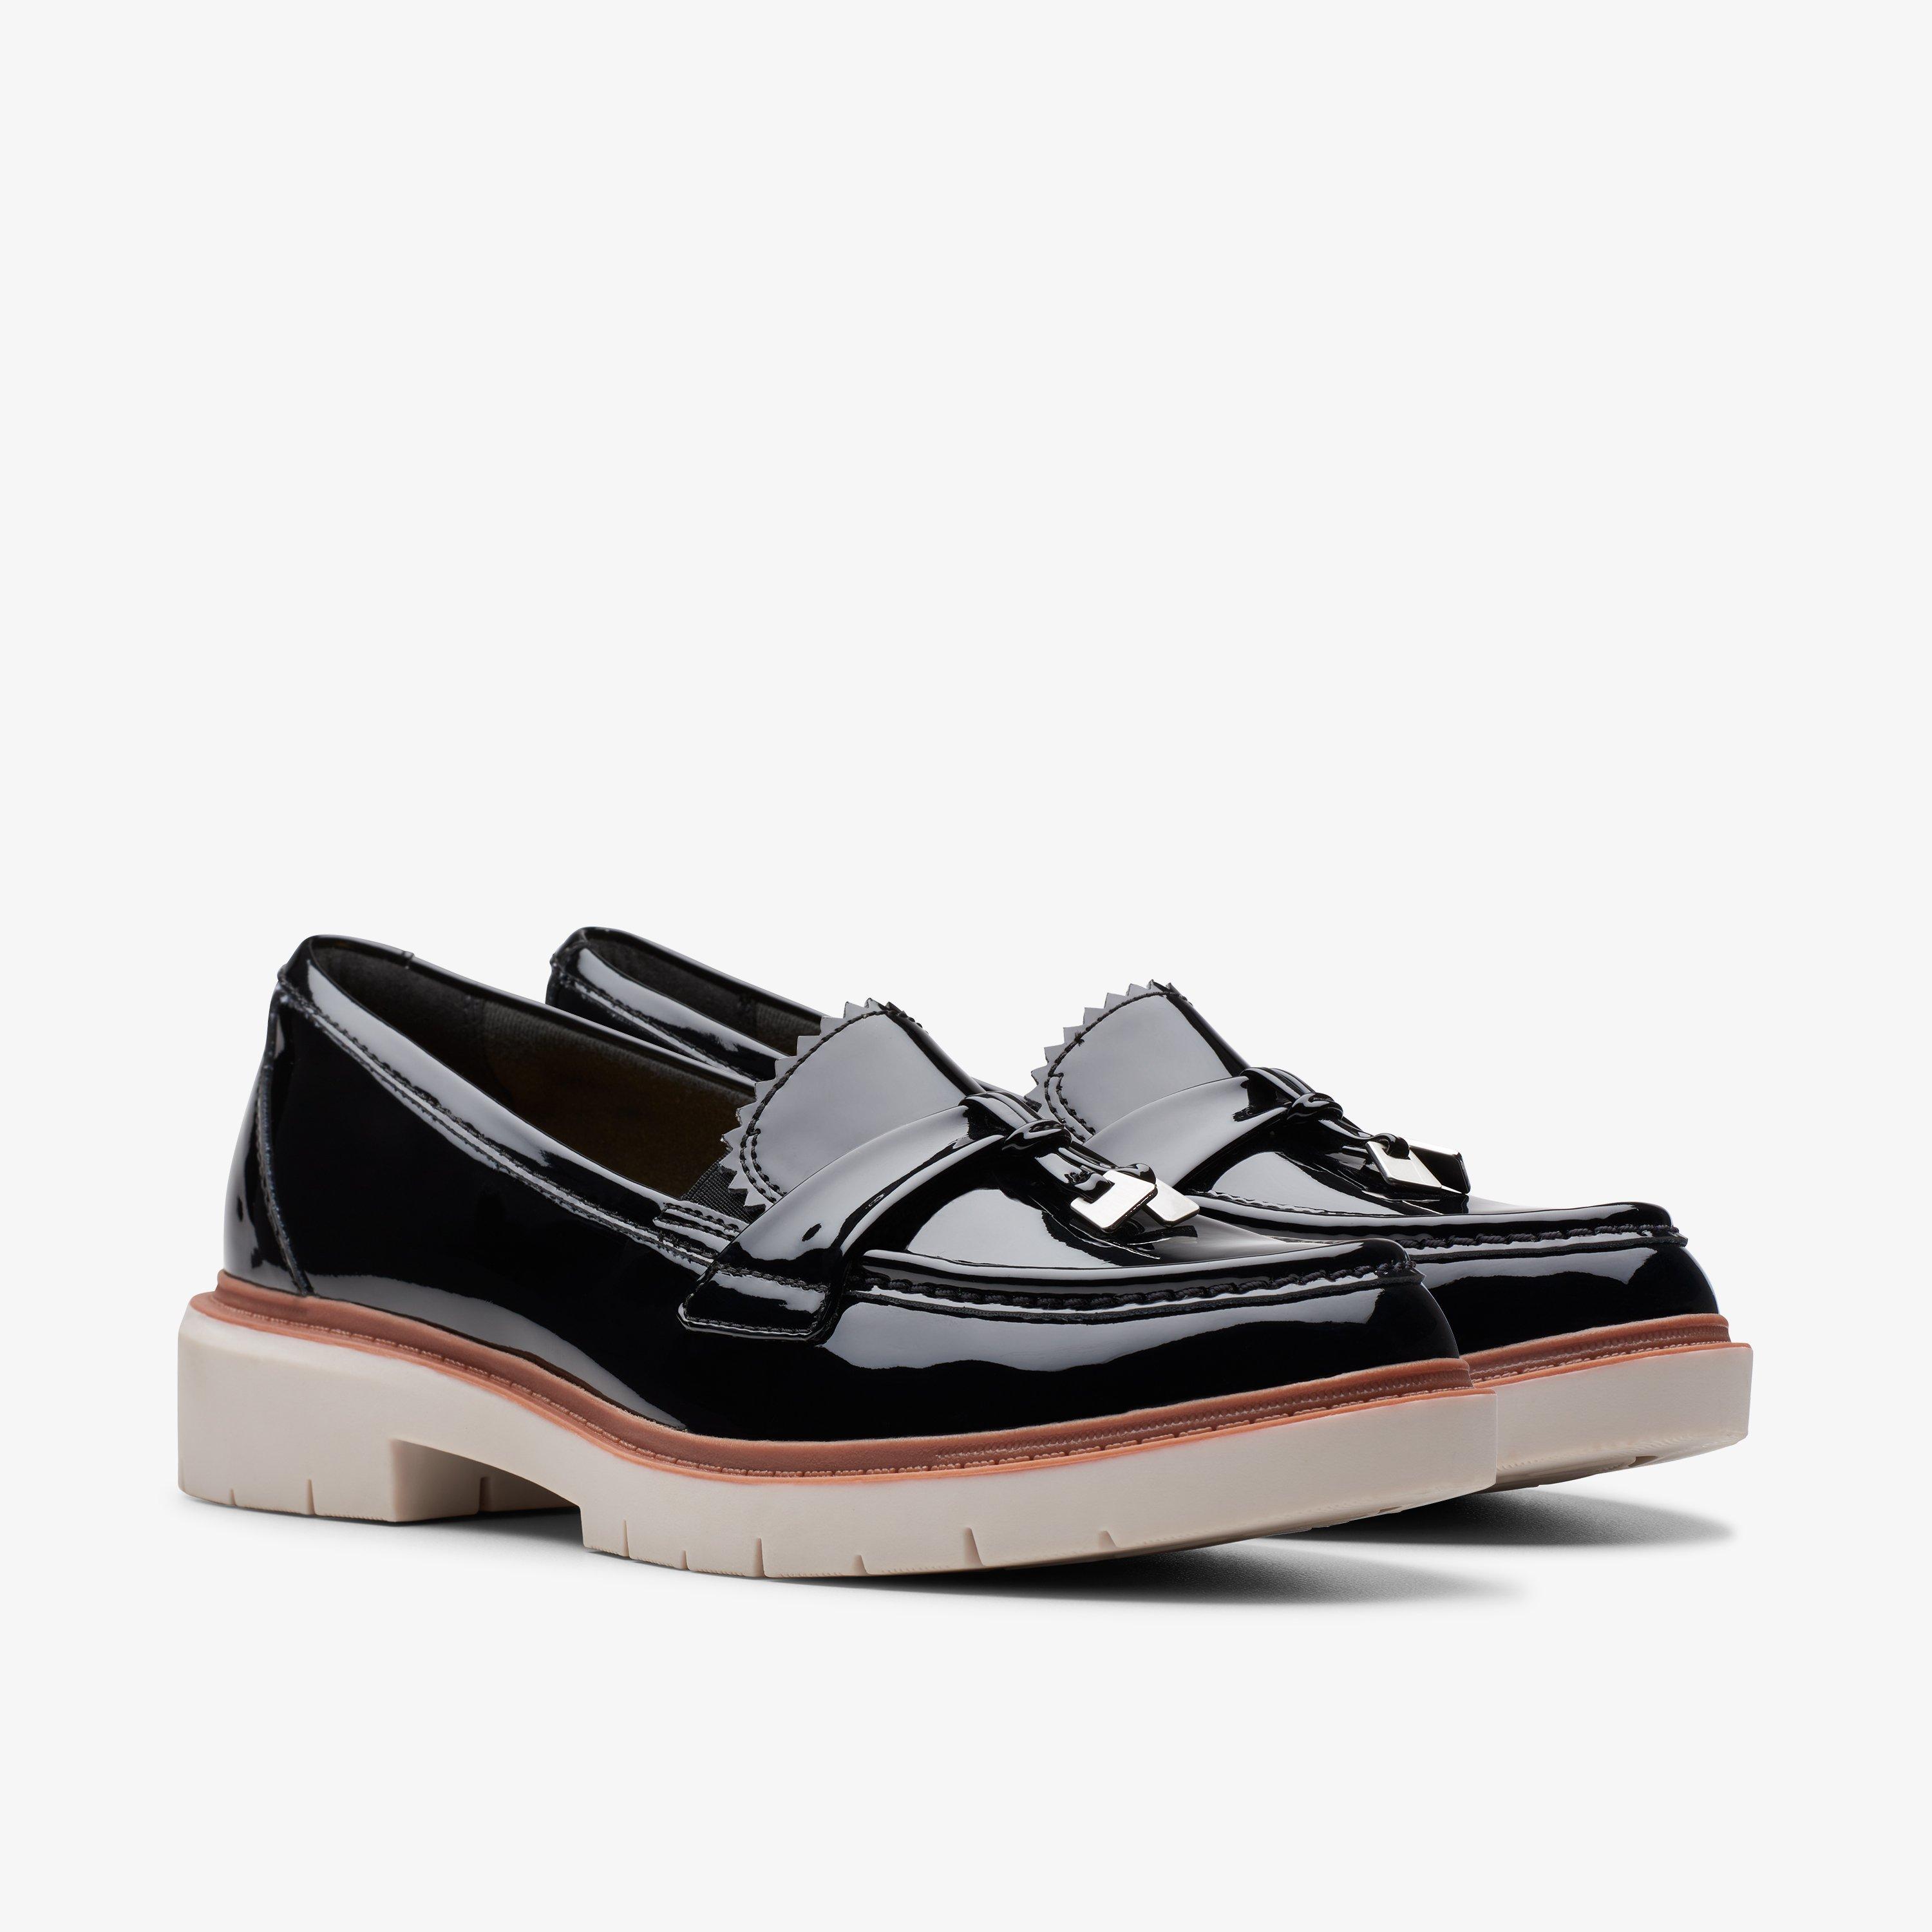 Women's Shoes - Sneakers, Casual & Dress | Clarks US